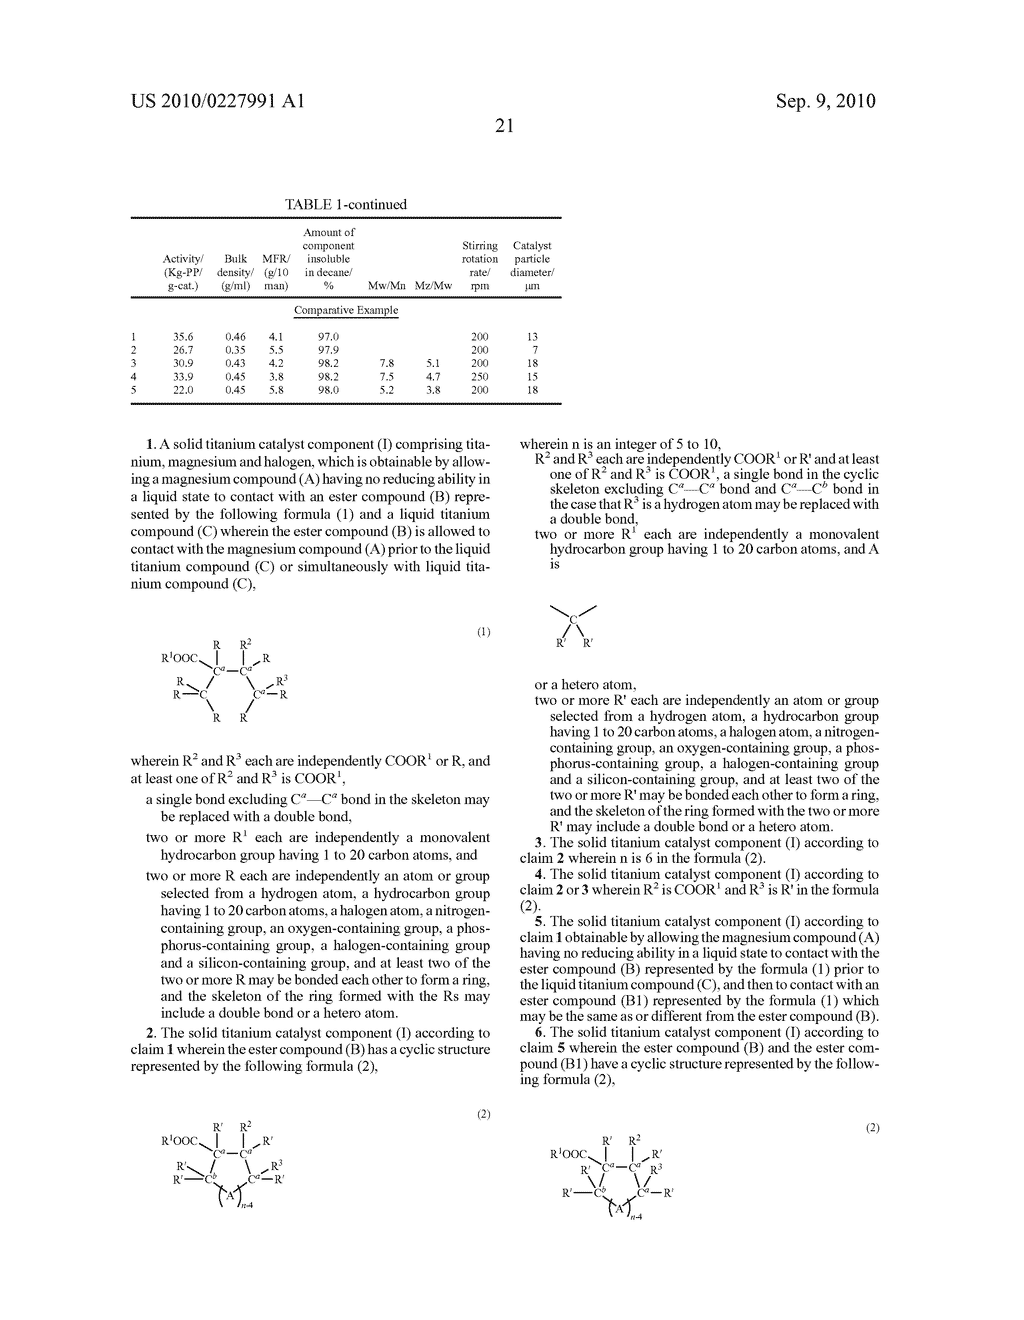 SOLID TITANIUM CATALYST COMPONENT, CATALIST FOR OLEFIN POLYMERIZATION AND PROCESS FOR POLYMERIZING OLEFIN - diagram, schematic, and image 22